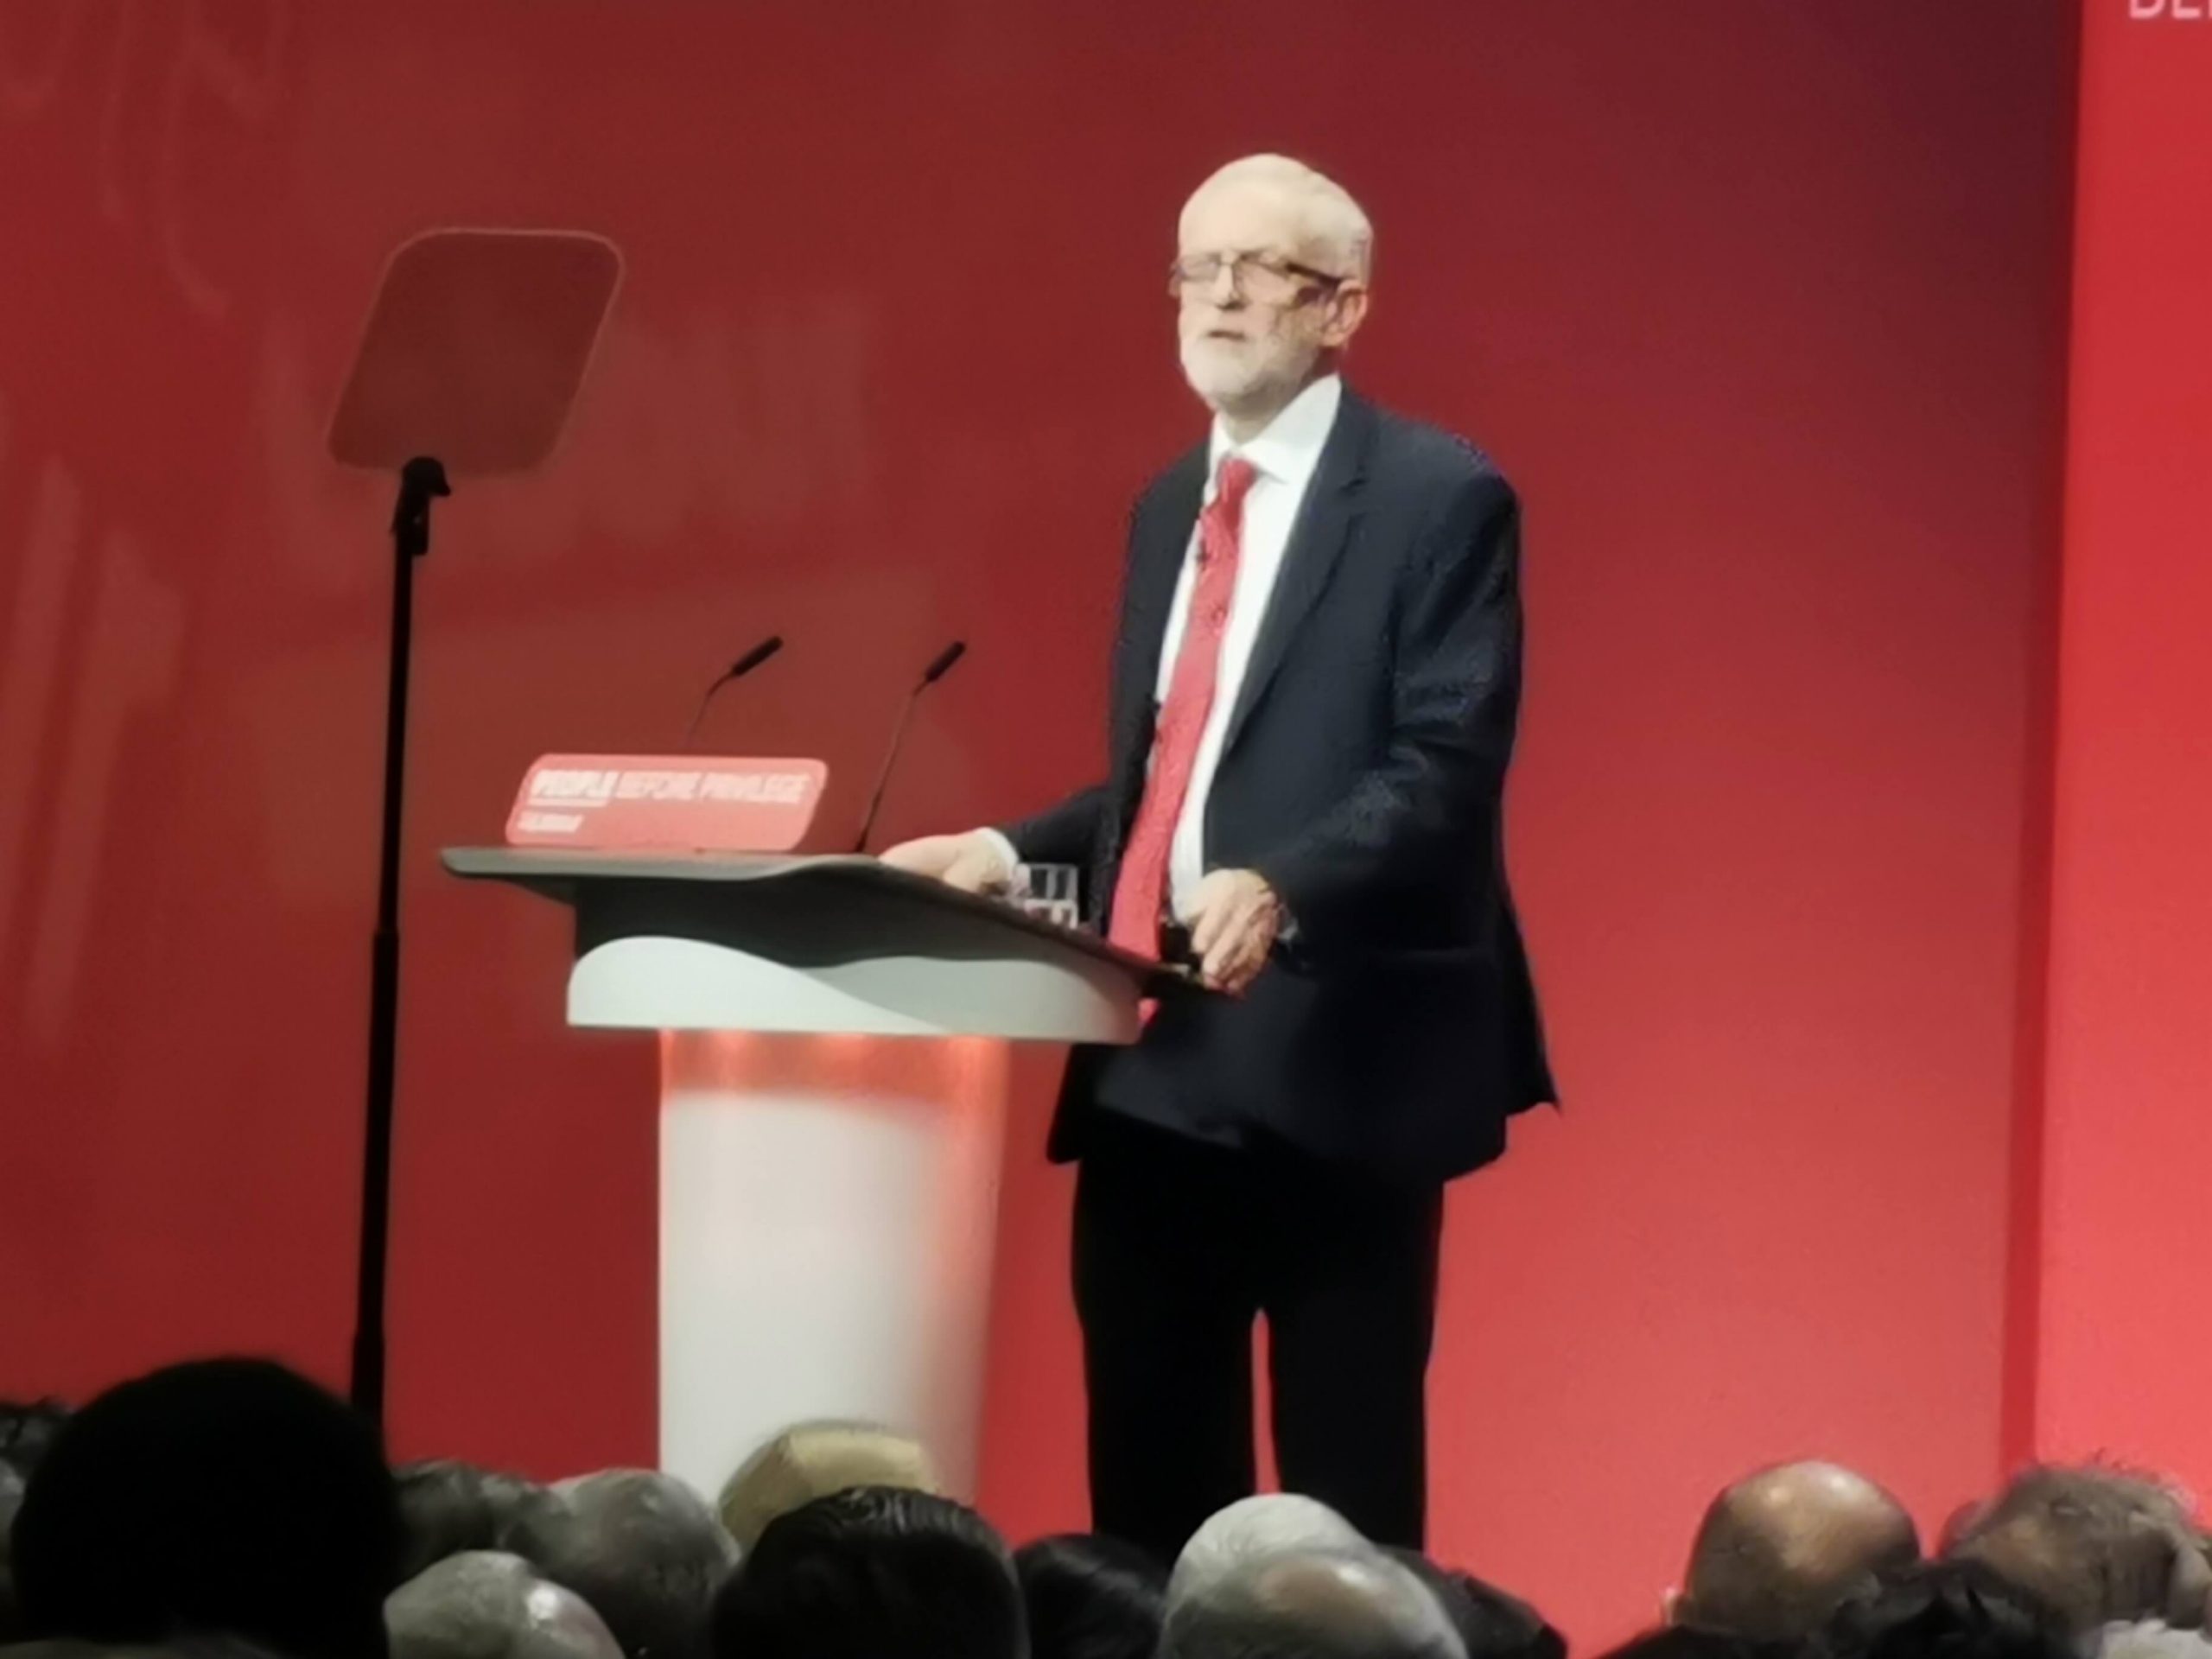 Jeremy Corbyn standing giving his final speech at the Labour Conference in Brighton in 2019.